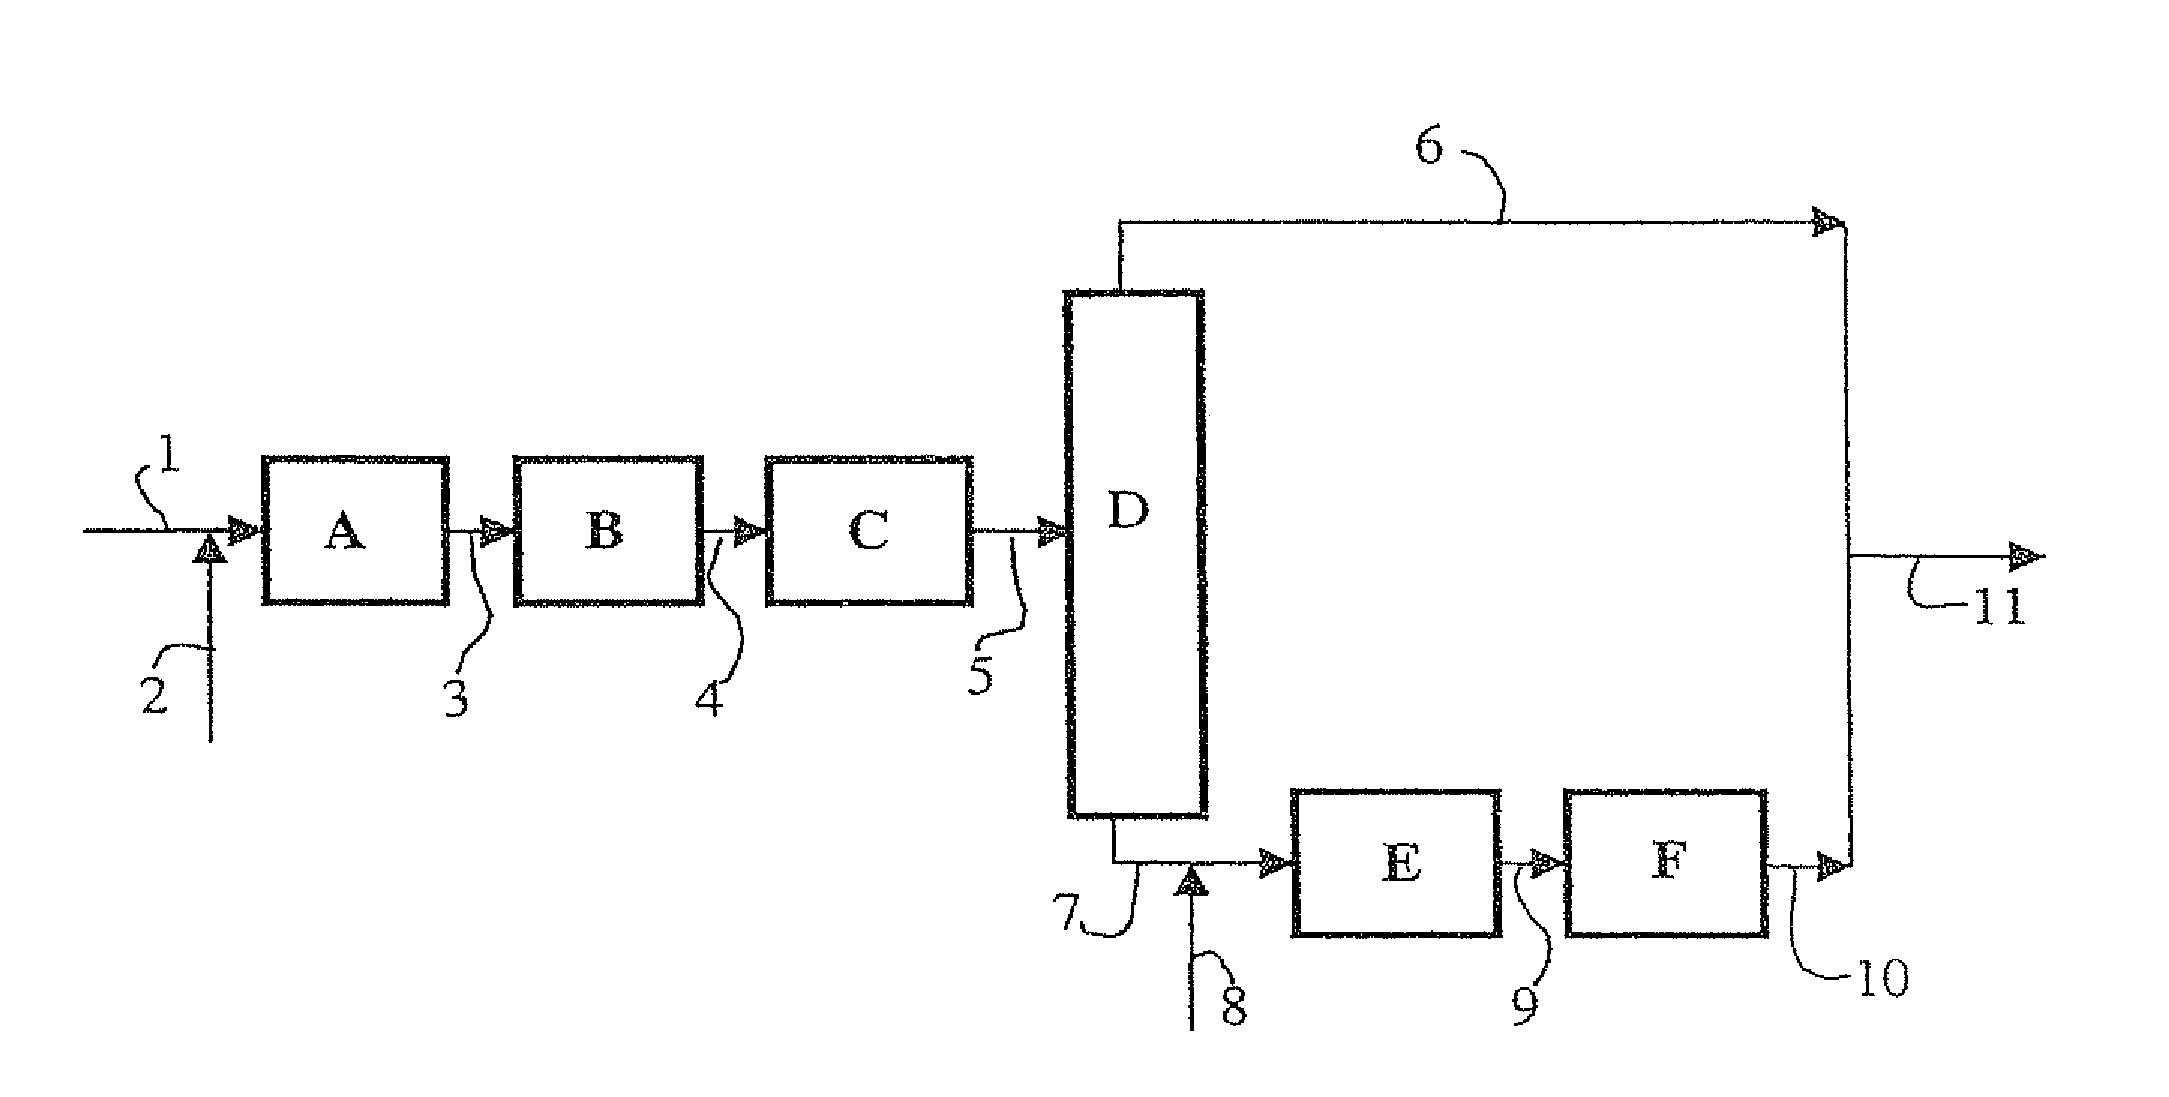 Process for the production of a desulfurized gasoline from a gasoline fraction that contains conversion gasoline